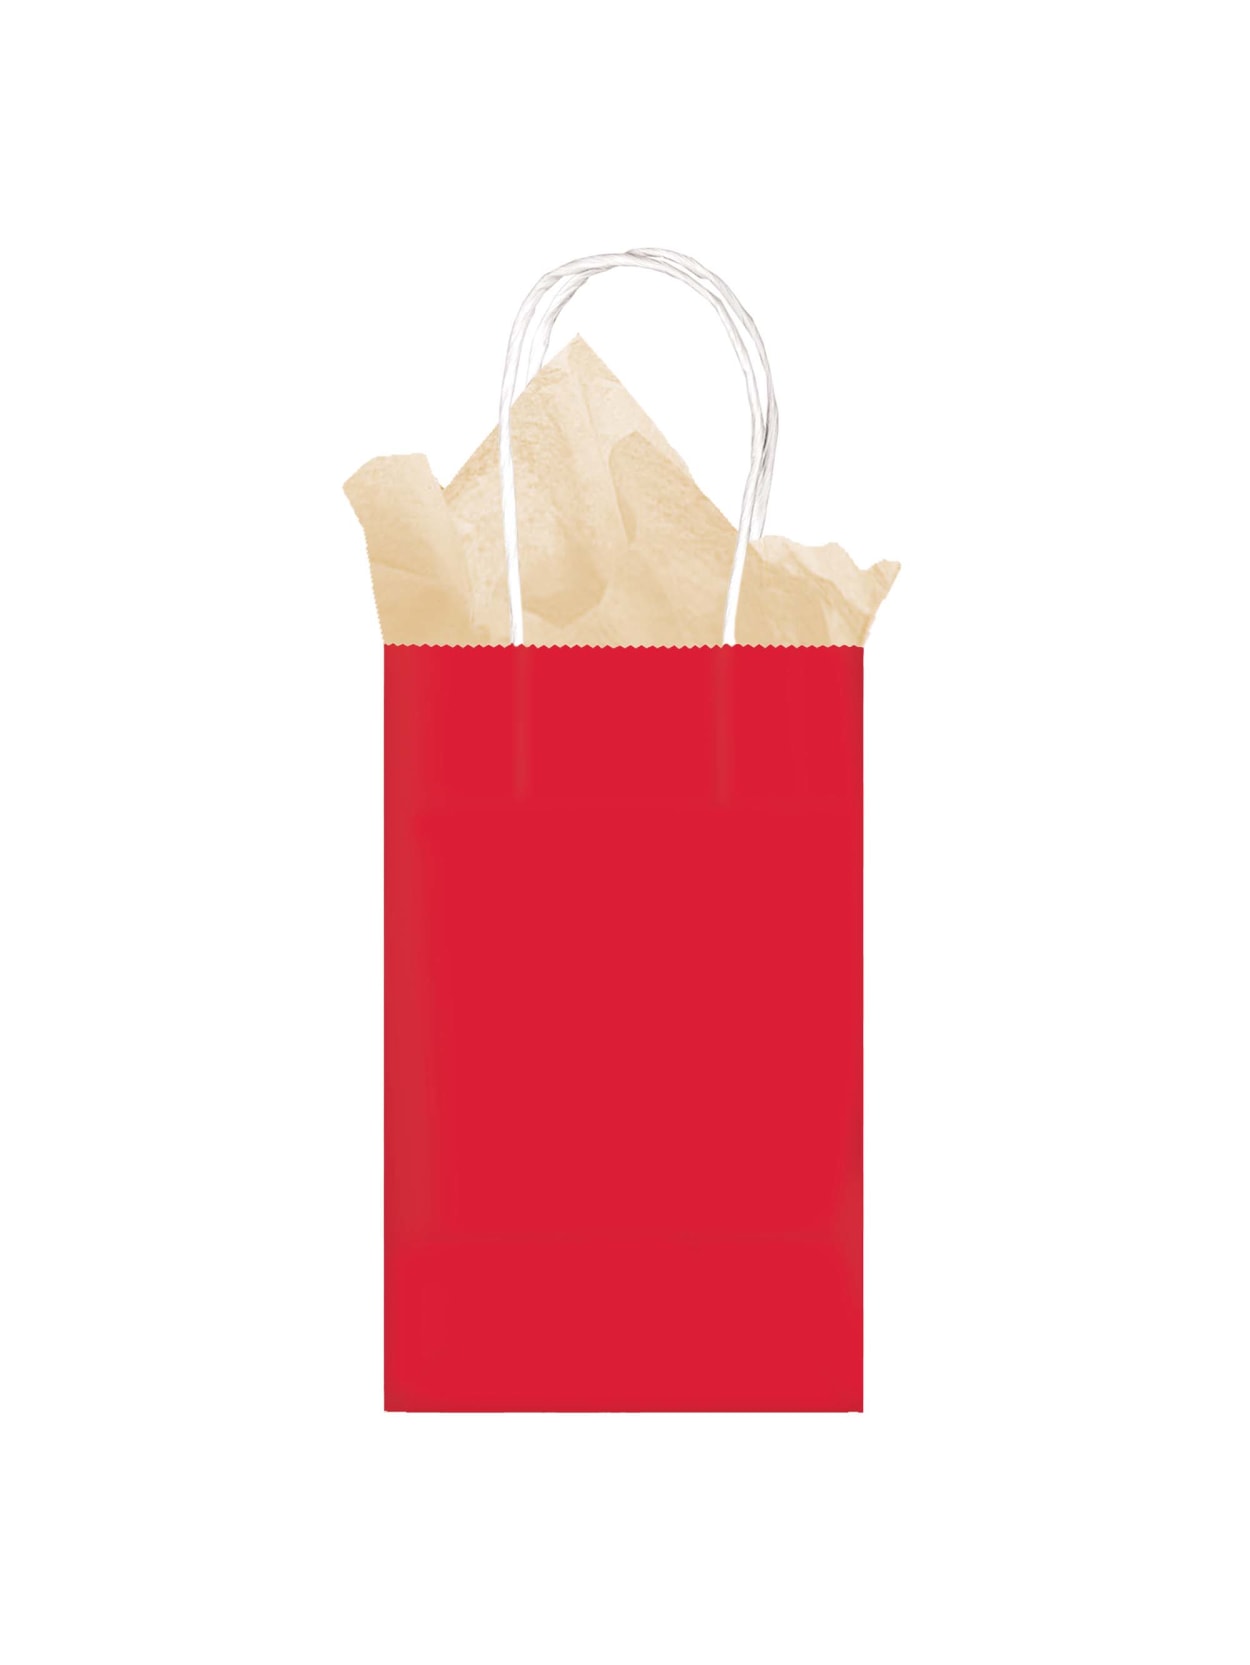 Download Amscan Small Gift Bags Apple Red 24pk Office Depot